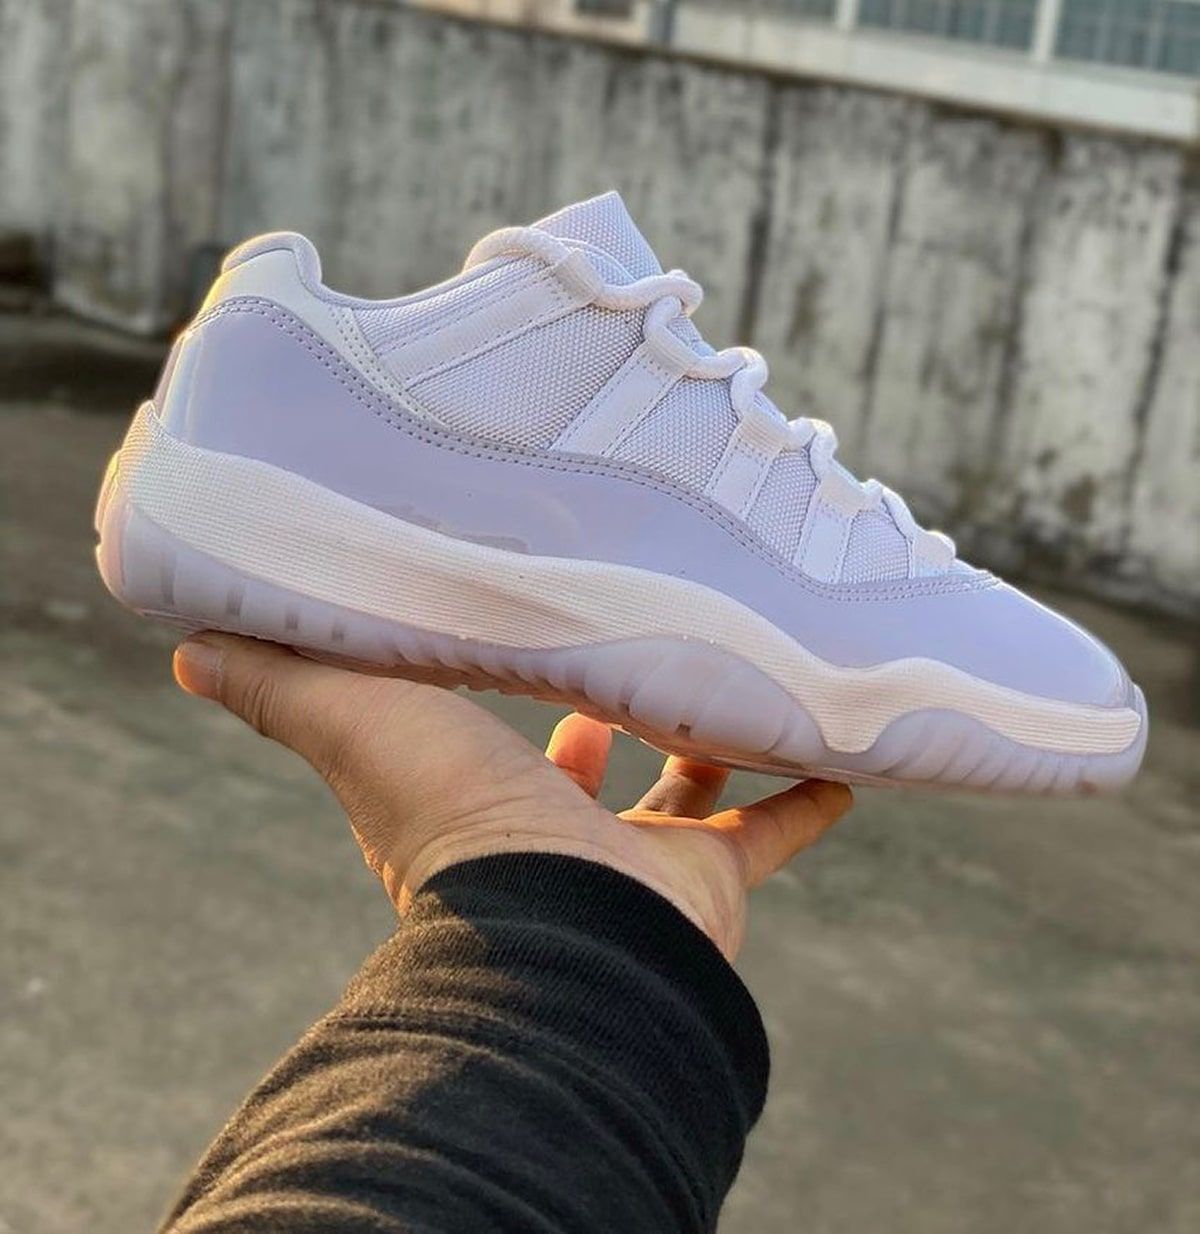 Where to Buy the Air Jordan 11 Low "Pure Violet" | HOUSE OF HEAT